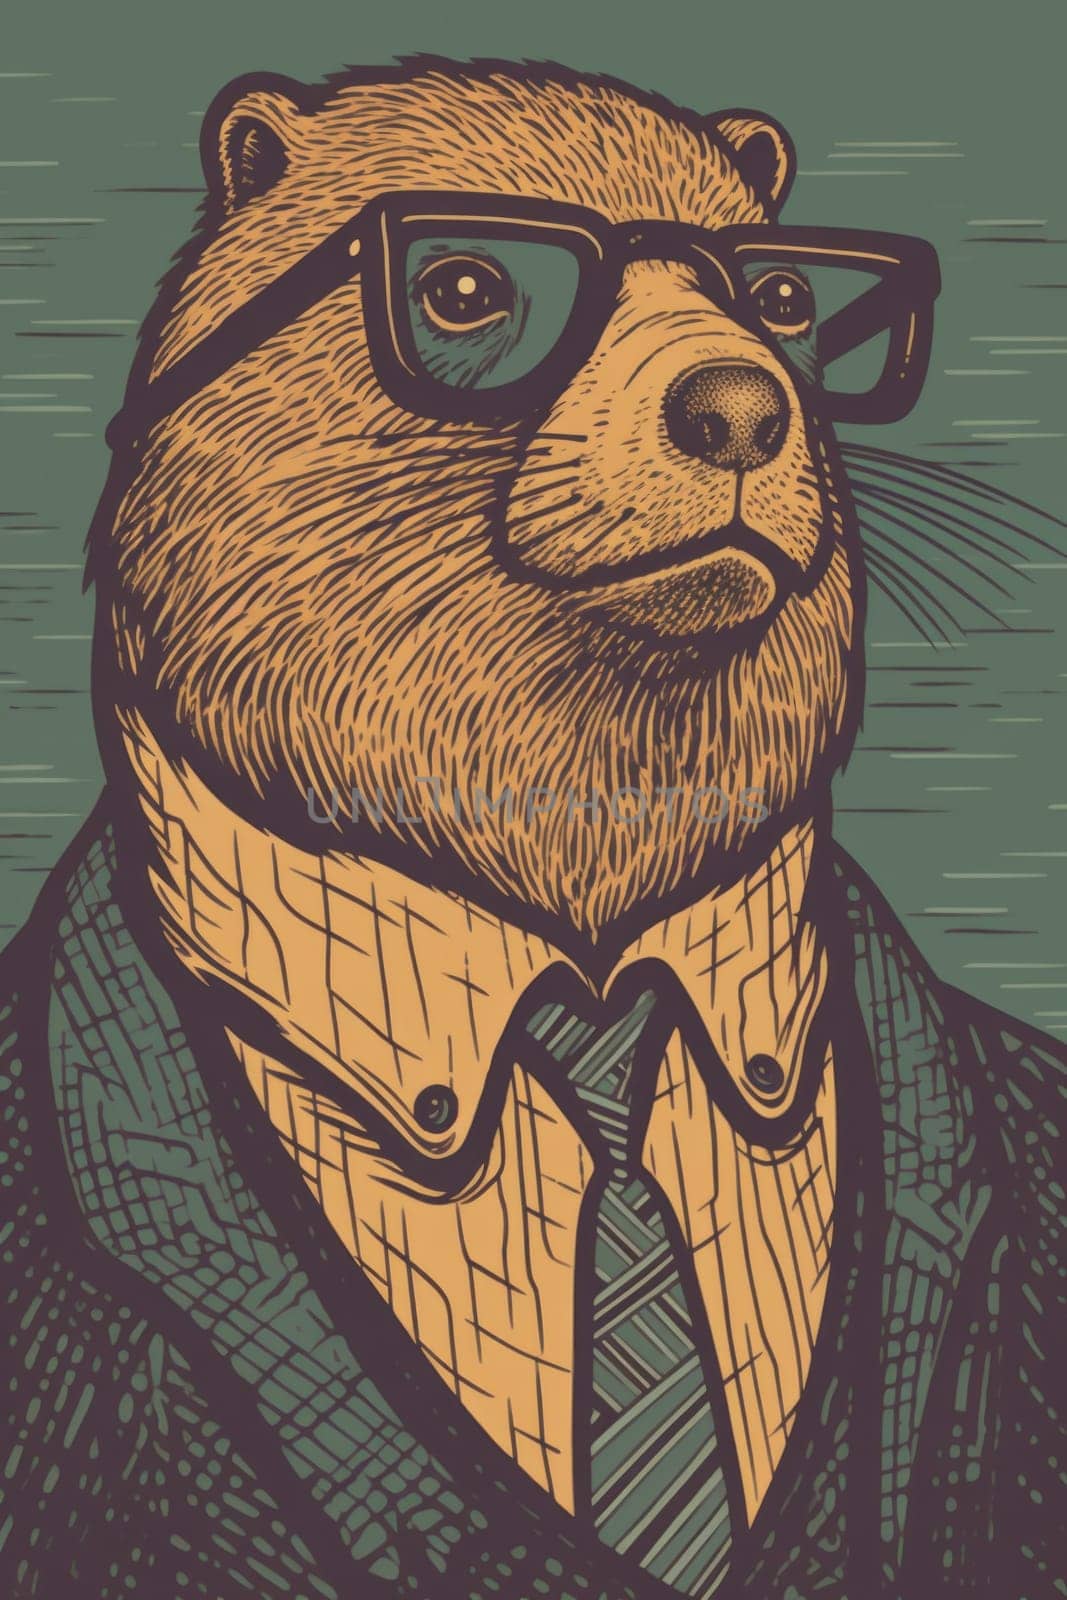 A drawing of a bear wearing glasses and a tie, AI by starush